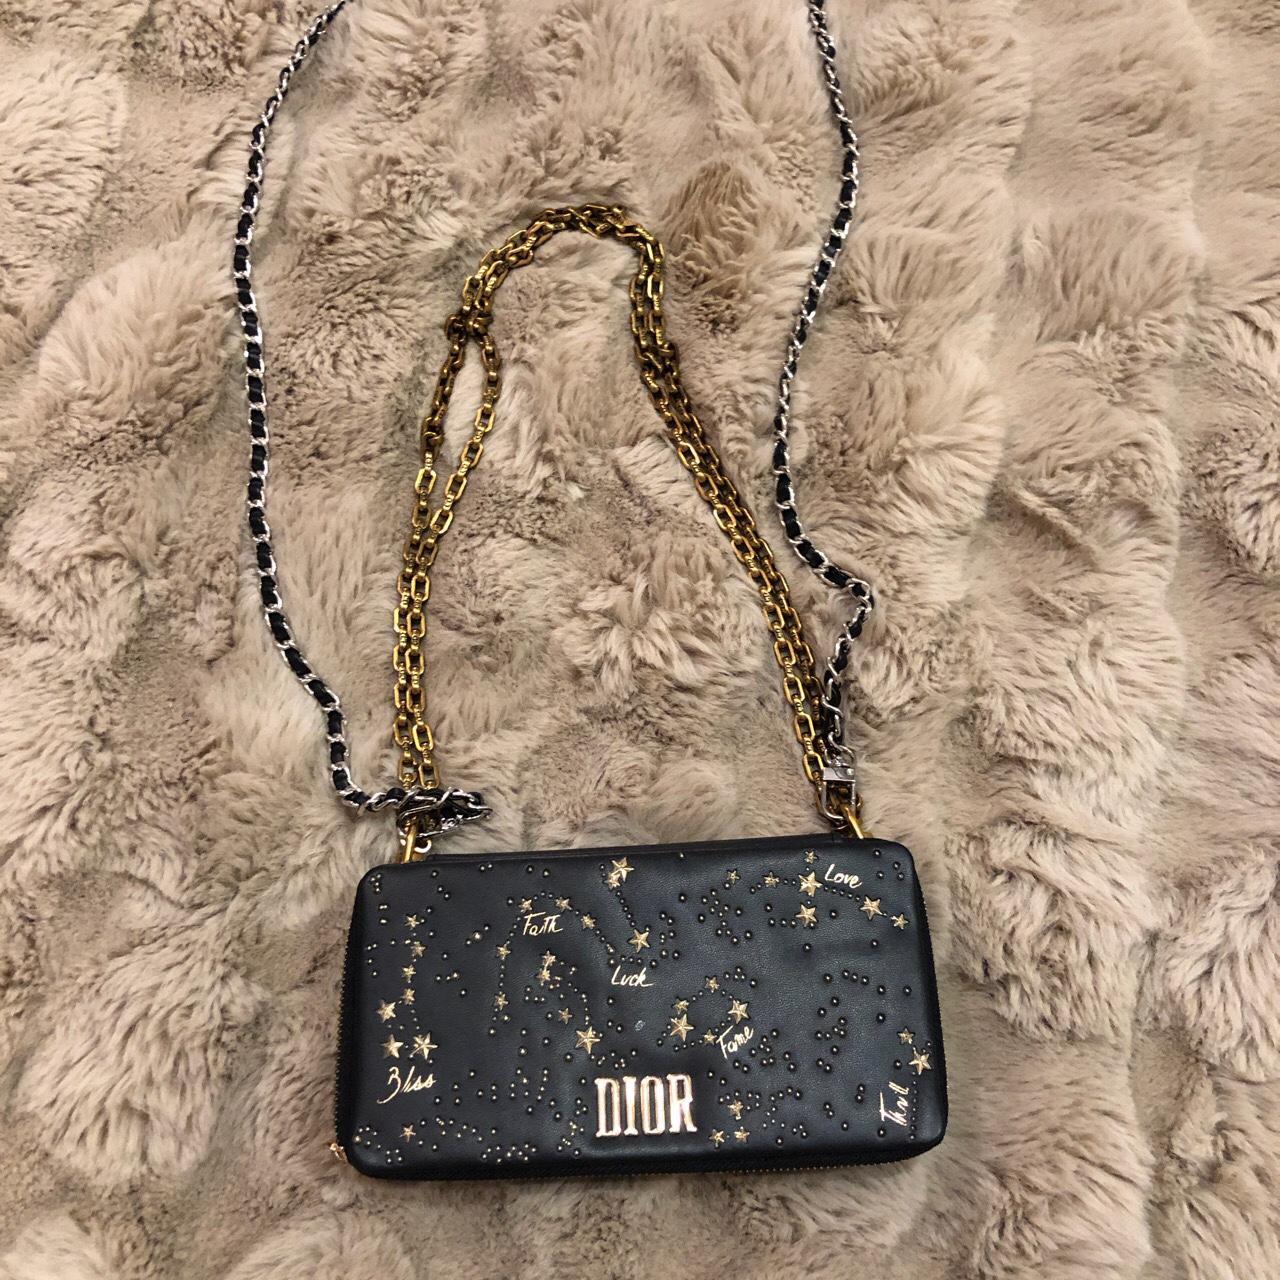 Louis Vuitton tote bag from the 'Dream' exhibition - Depop